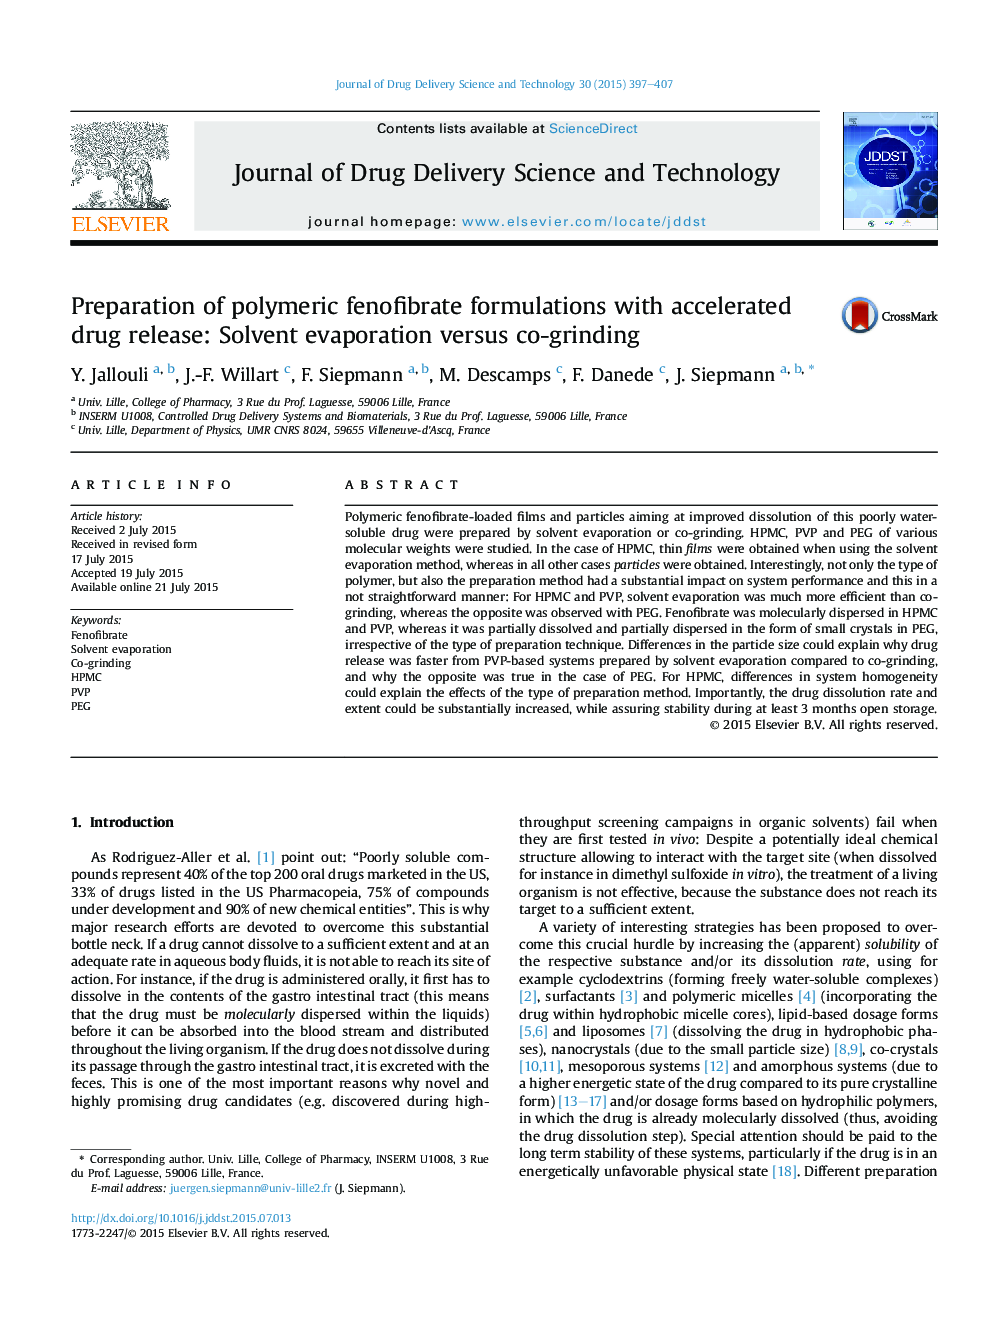 Preparation of polymeric fenofibrate formulations with accelerated drug release: Solvent evaporation versus co-grinding